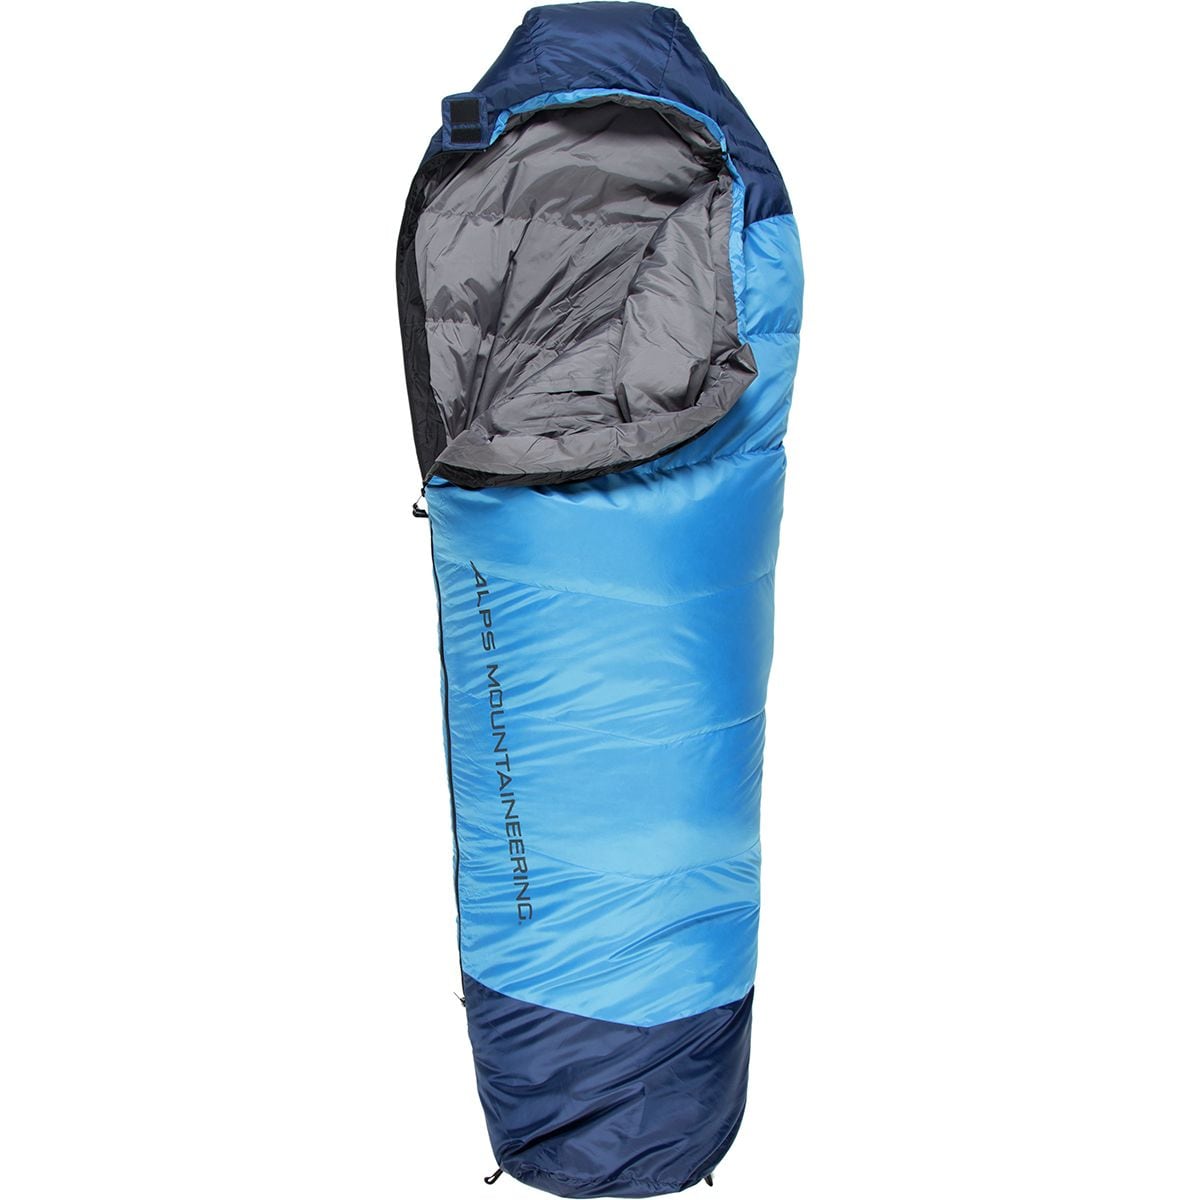 ALPS Mountaineering Quest 20 Sleeping Bag: 20F Down